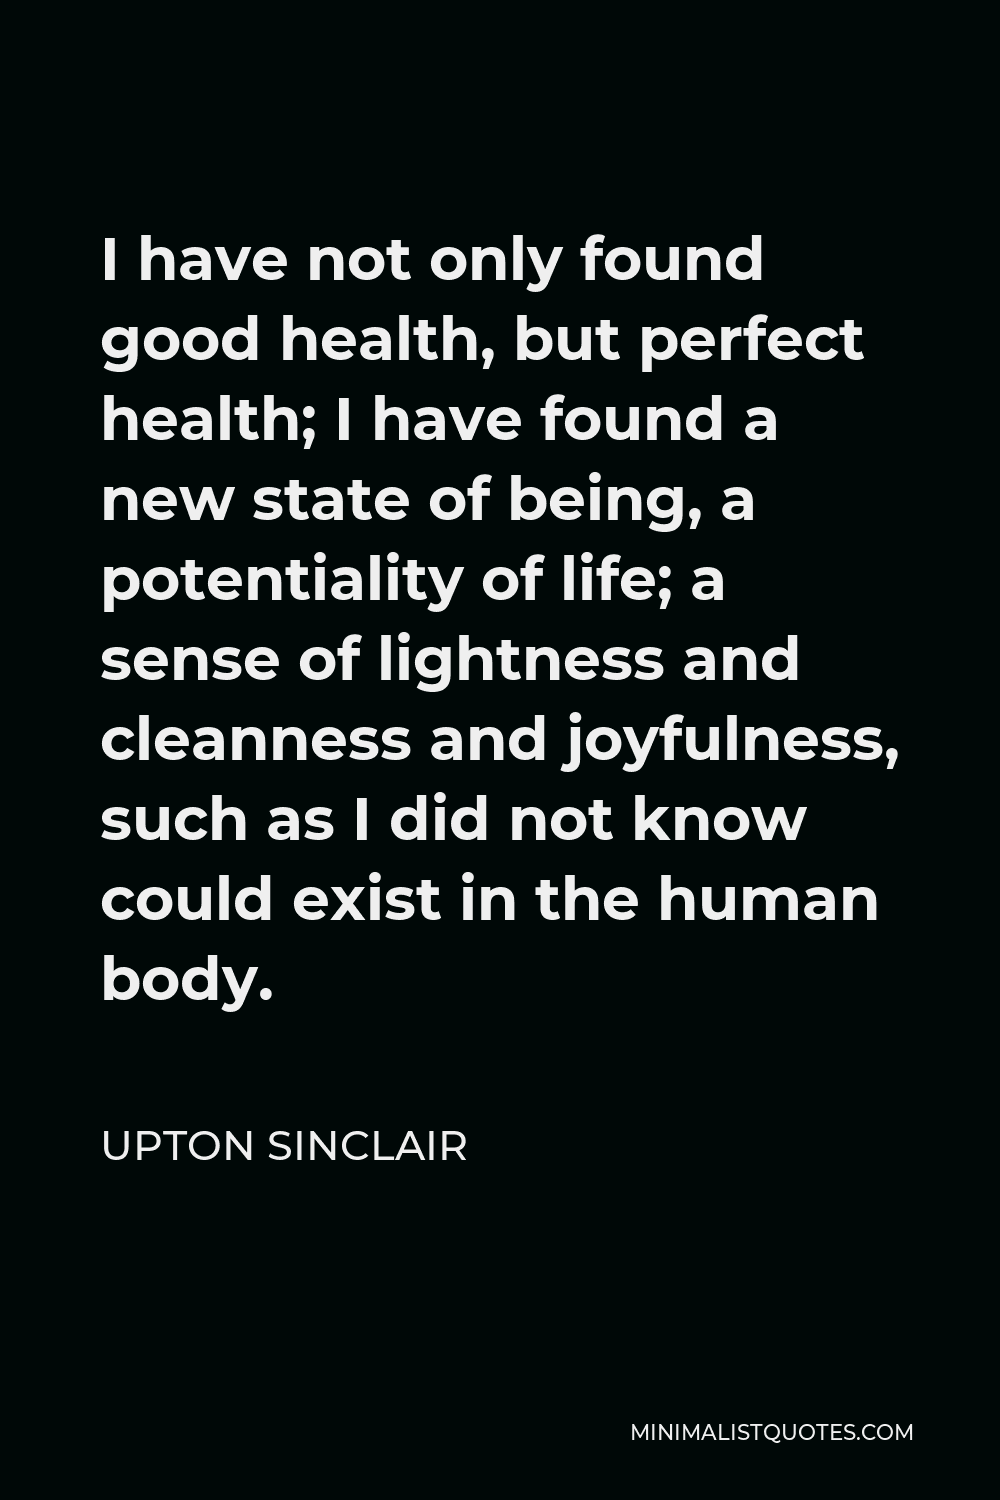 Upton Sinclair Quote - I have not only found good health, but perfect health; I have found a new state of being, a potentiality of life; a sense of lightness and cleanness and joyfulness, such as I did not know could exist in the human body.